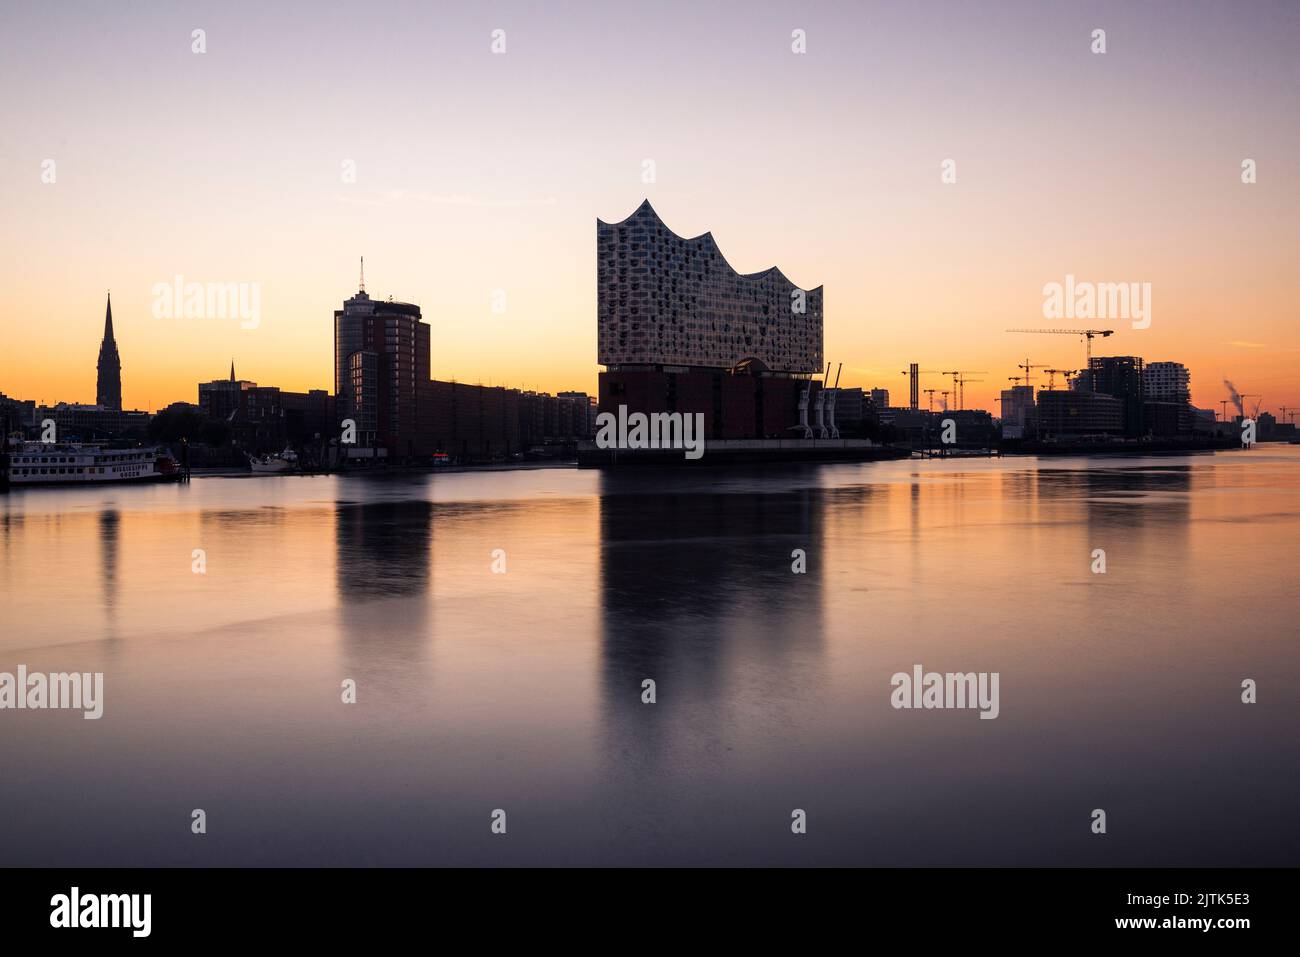 The Elbe Philharmonic Hall and Hamburg skyline reflected in the river Elbe at dawn, Hamburg, Germany Stock Photo